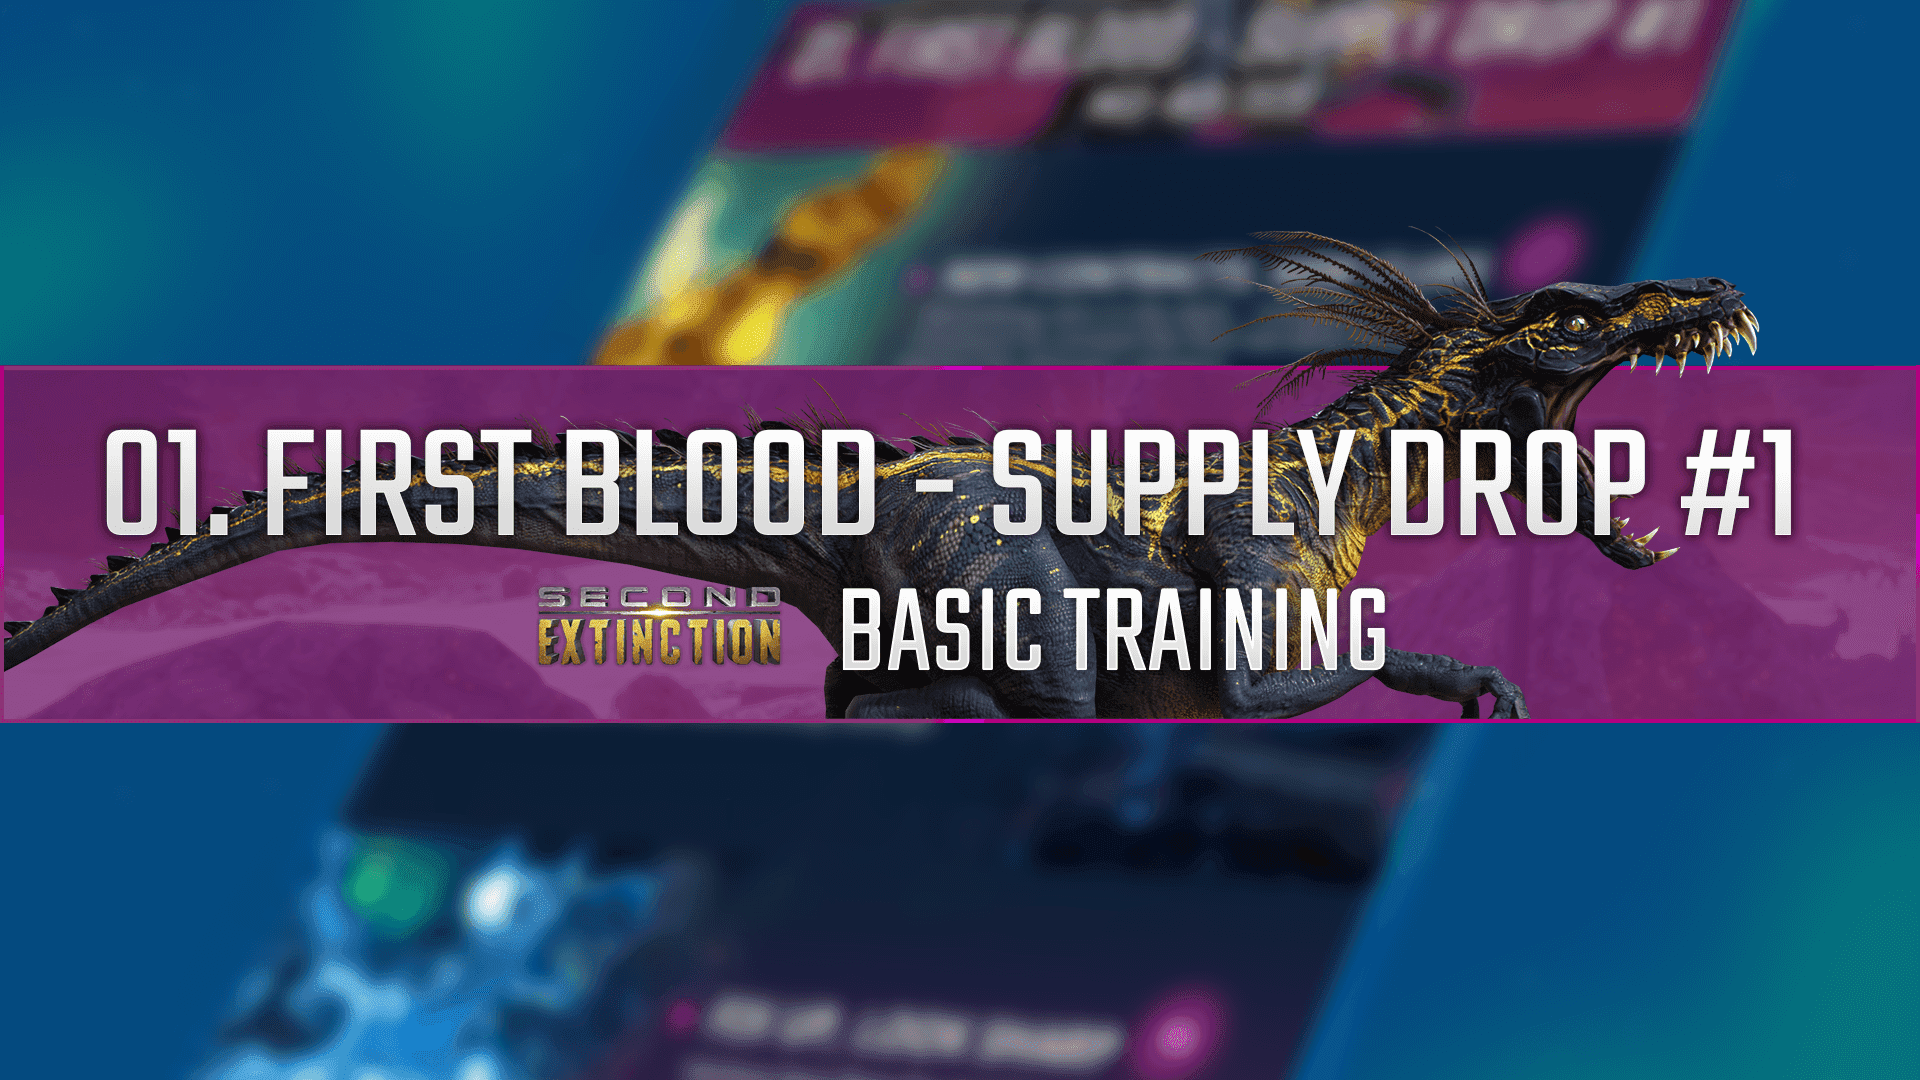 The First Supply Drop is about to land!